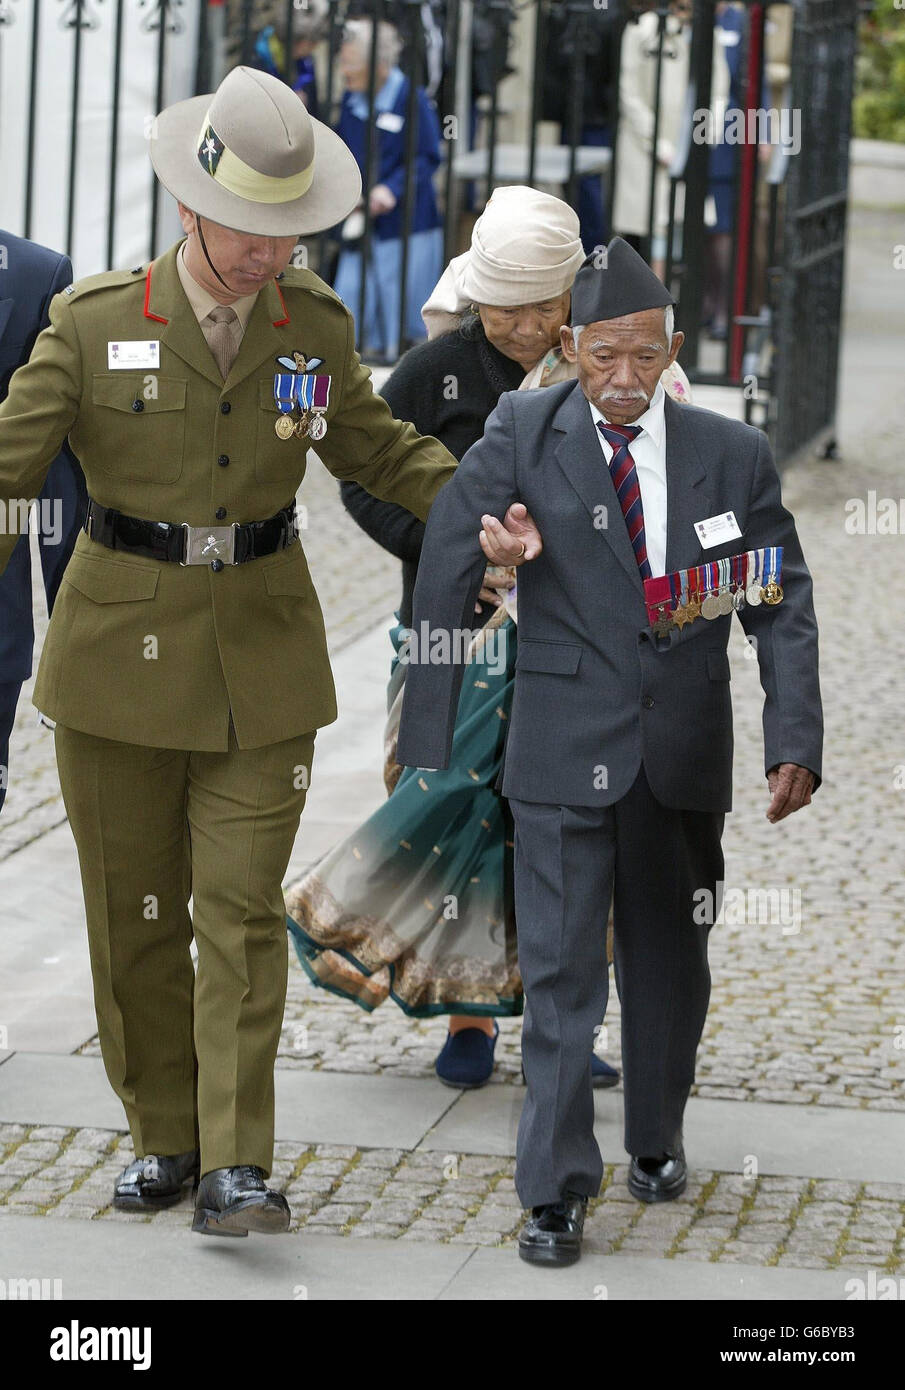 A Victoria Cross hero arrives at Westminster Abbey as heroes awarded the Victoria and George Crosses welcomed the commemoration of their valour with a national memorial unveiled by the Queen Elizabeth II. * The Queen who was accompanied by the Duke of Edinburgh, Wednesday May 14 2003, for The Dedication of The Victoria Cross and the George Cross Memorial.More than 1,600 descendants of past holders of the medals were present for a service of dedication addressed by Archbishop of Canterbury Dr Rowan Williams. Stock Photo